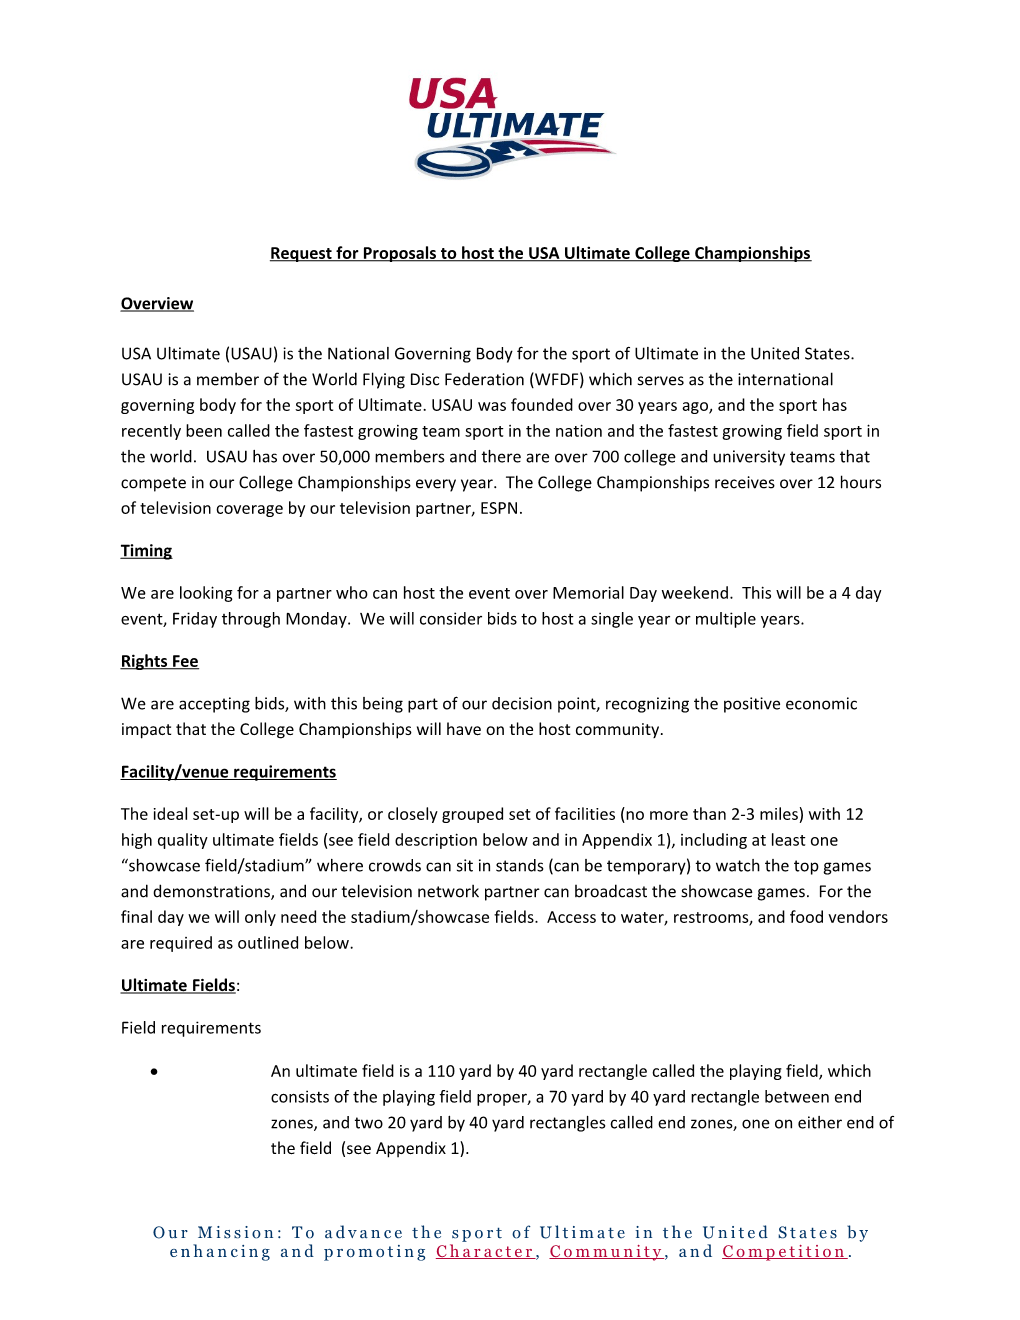 Request for Proposals to Host the USA Ultimate College Championships